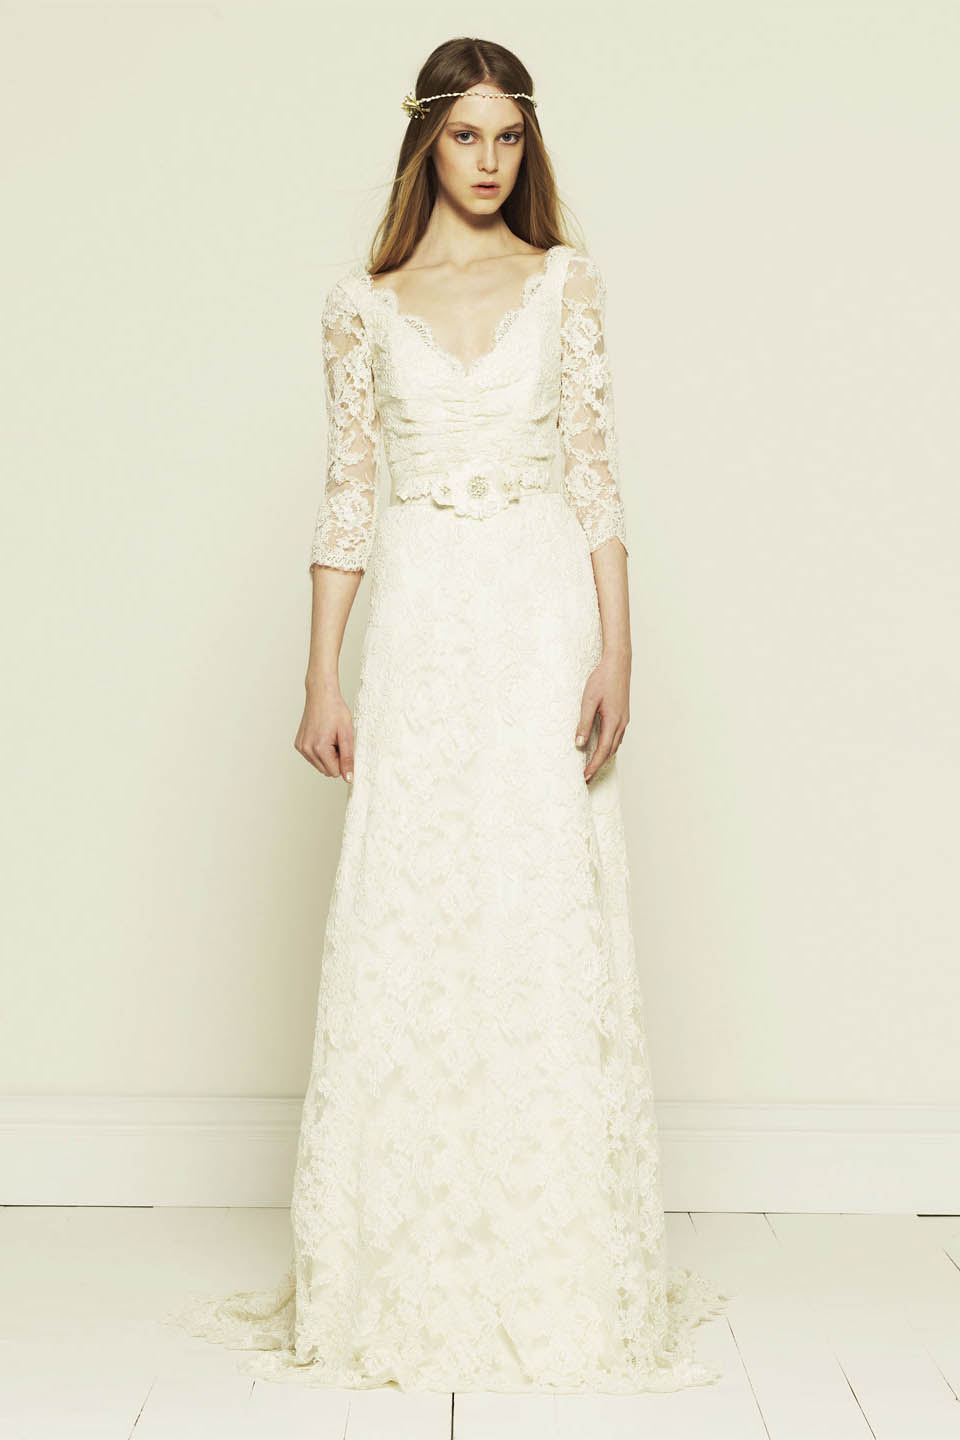 Collette Dinnigan French lace Long Sleeved Wedding Dress